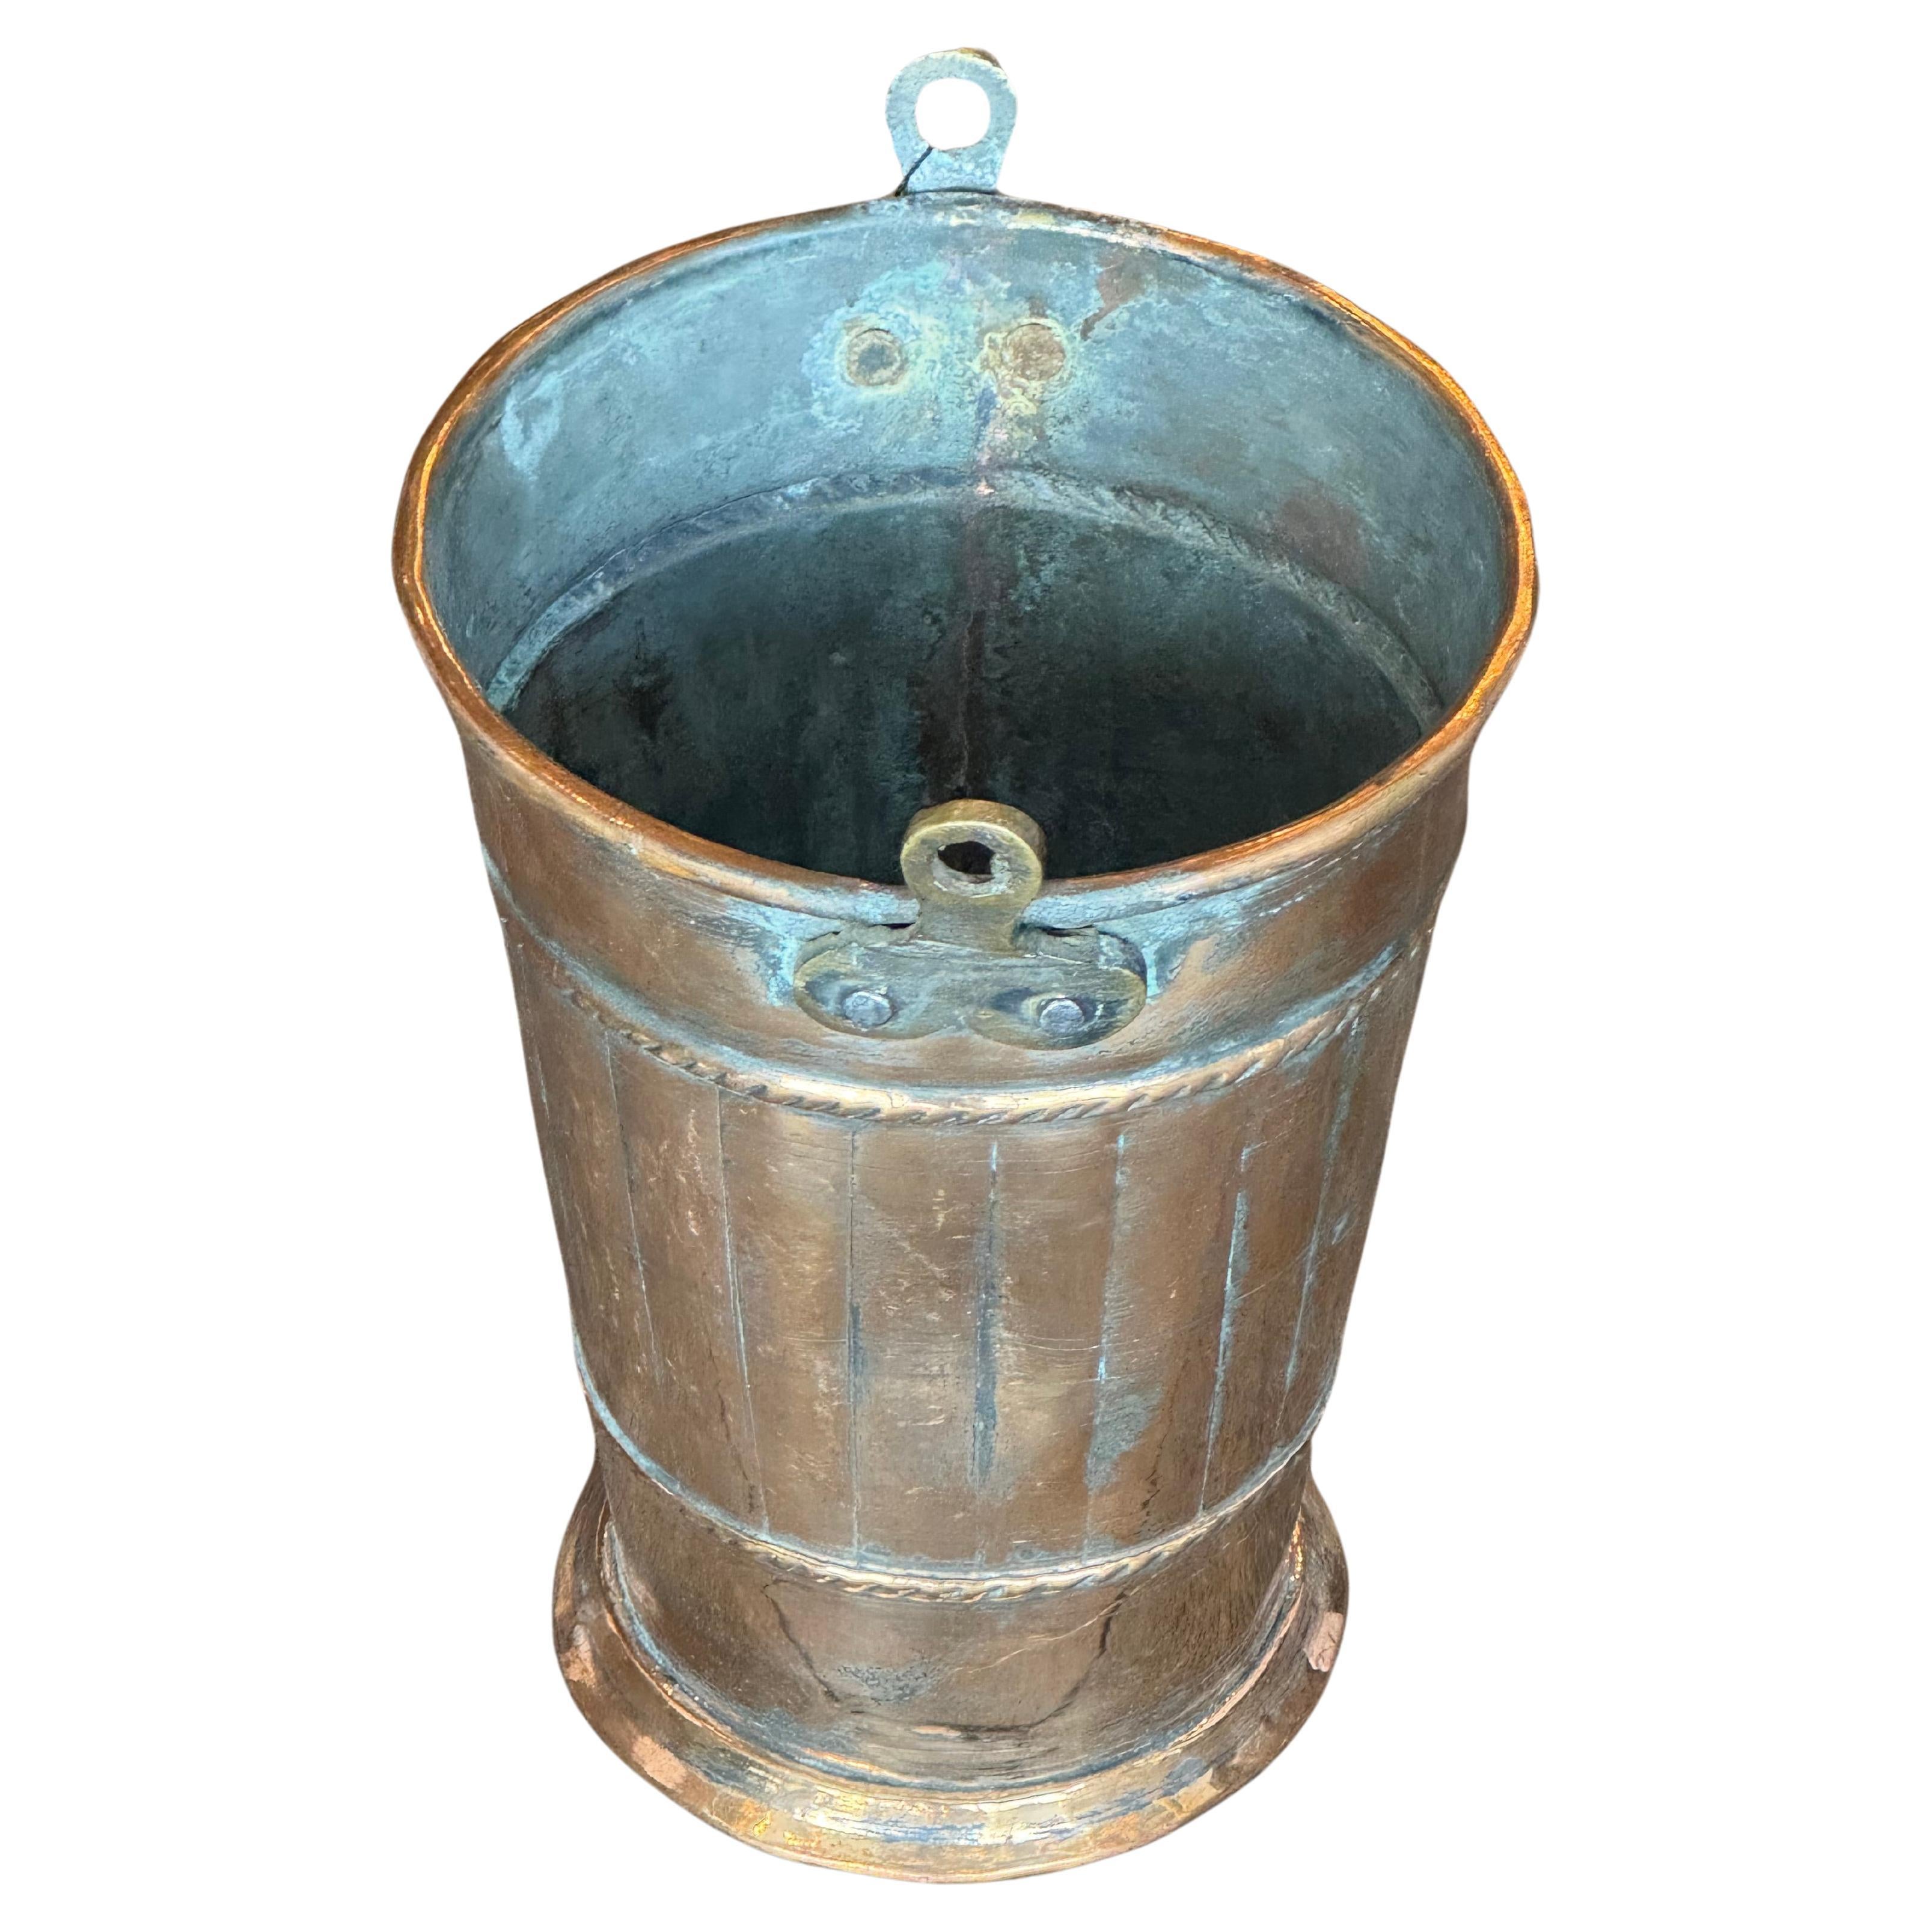 Antique copper-plated and patinated ice bucket
Circa England, from the early 20th Century
Sourced by Martyn Lawrence Bullard from London, England
Copper enhanced by a natural patina that has developed overtime, adding to the antique appeal of this